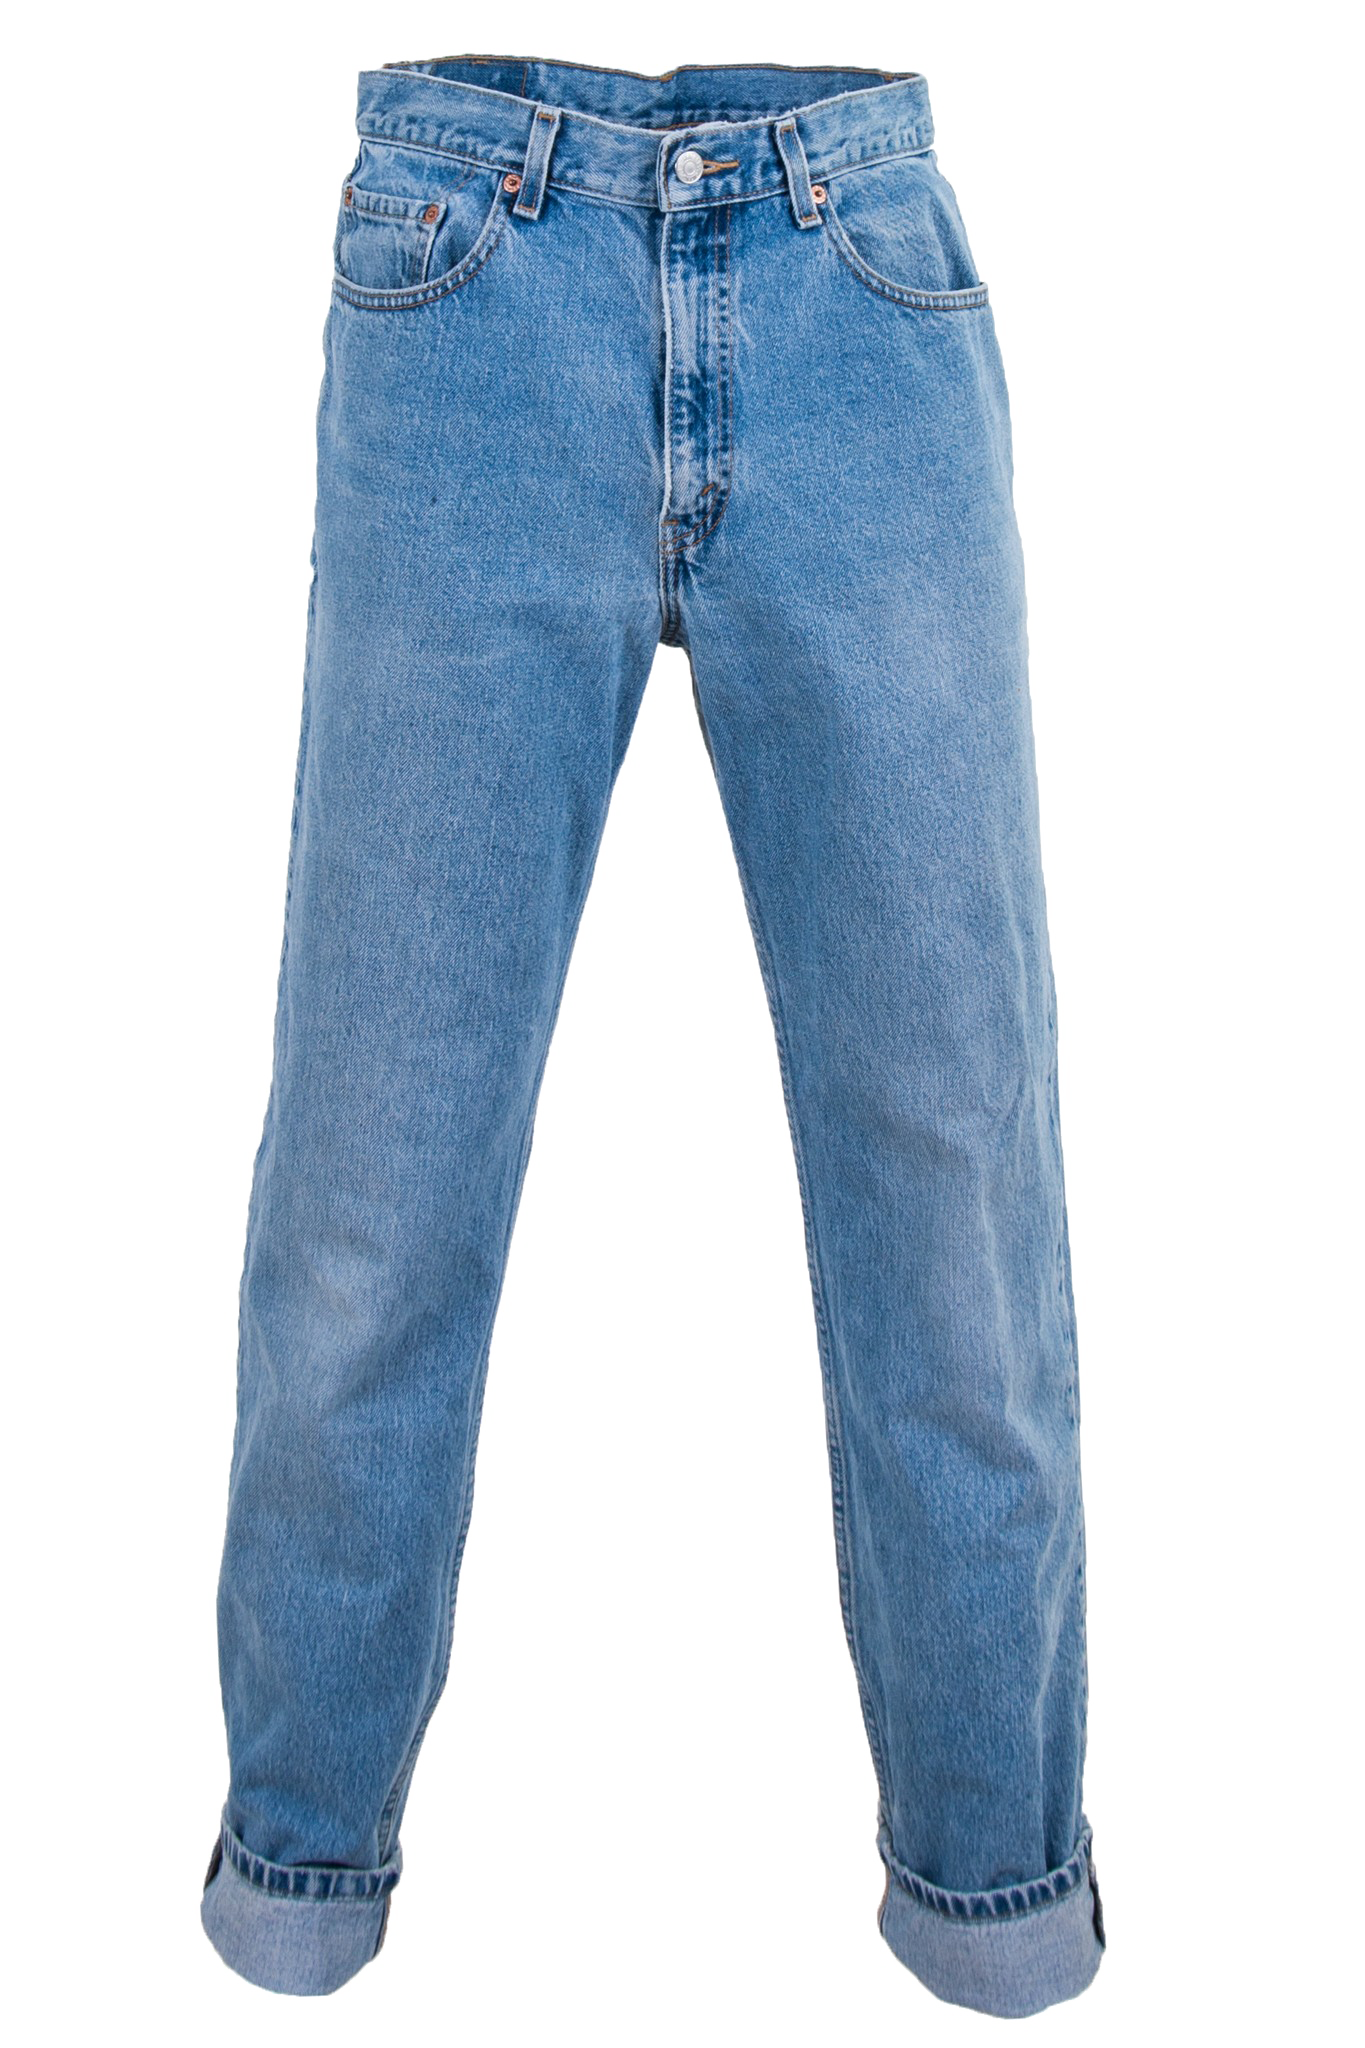 Jeans PNG Free File Download